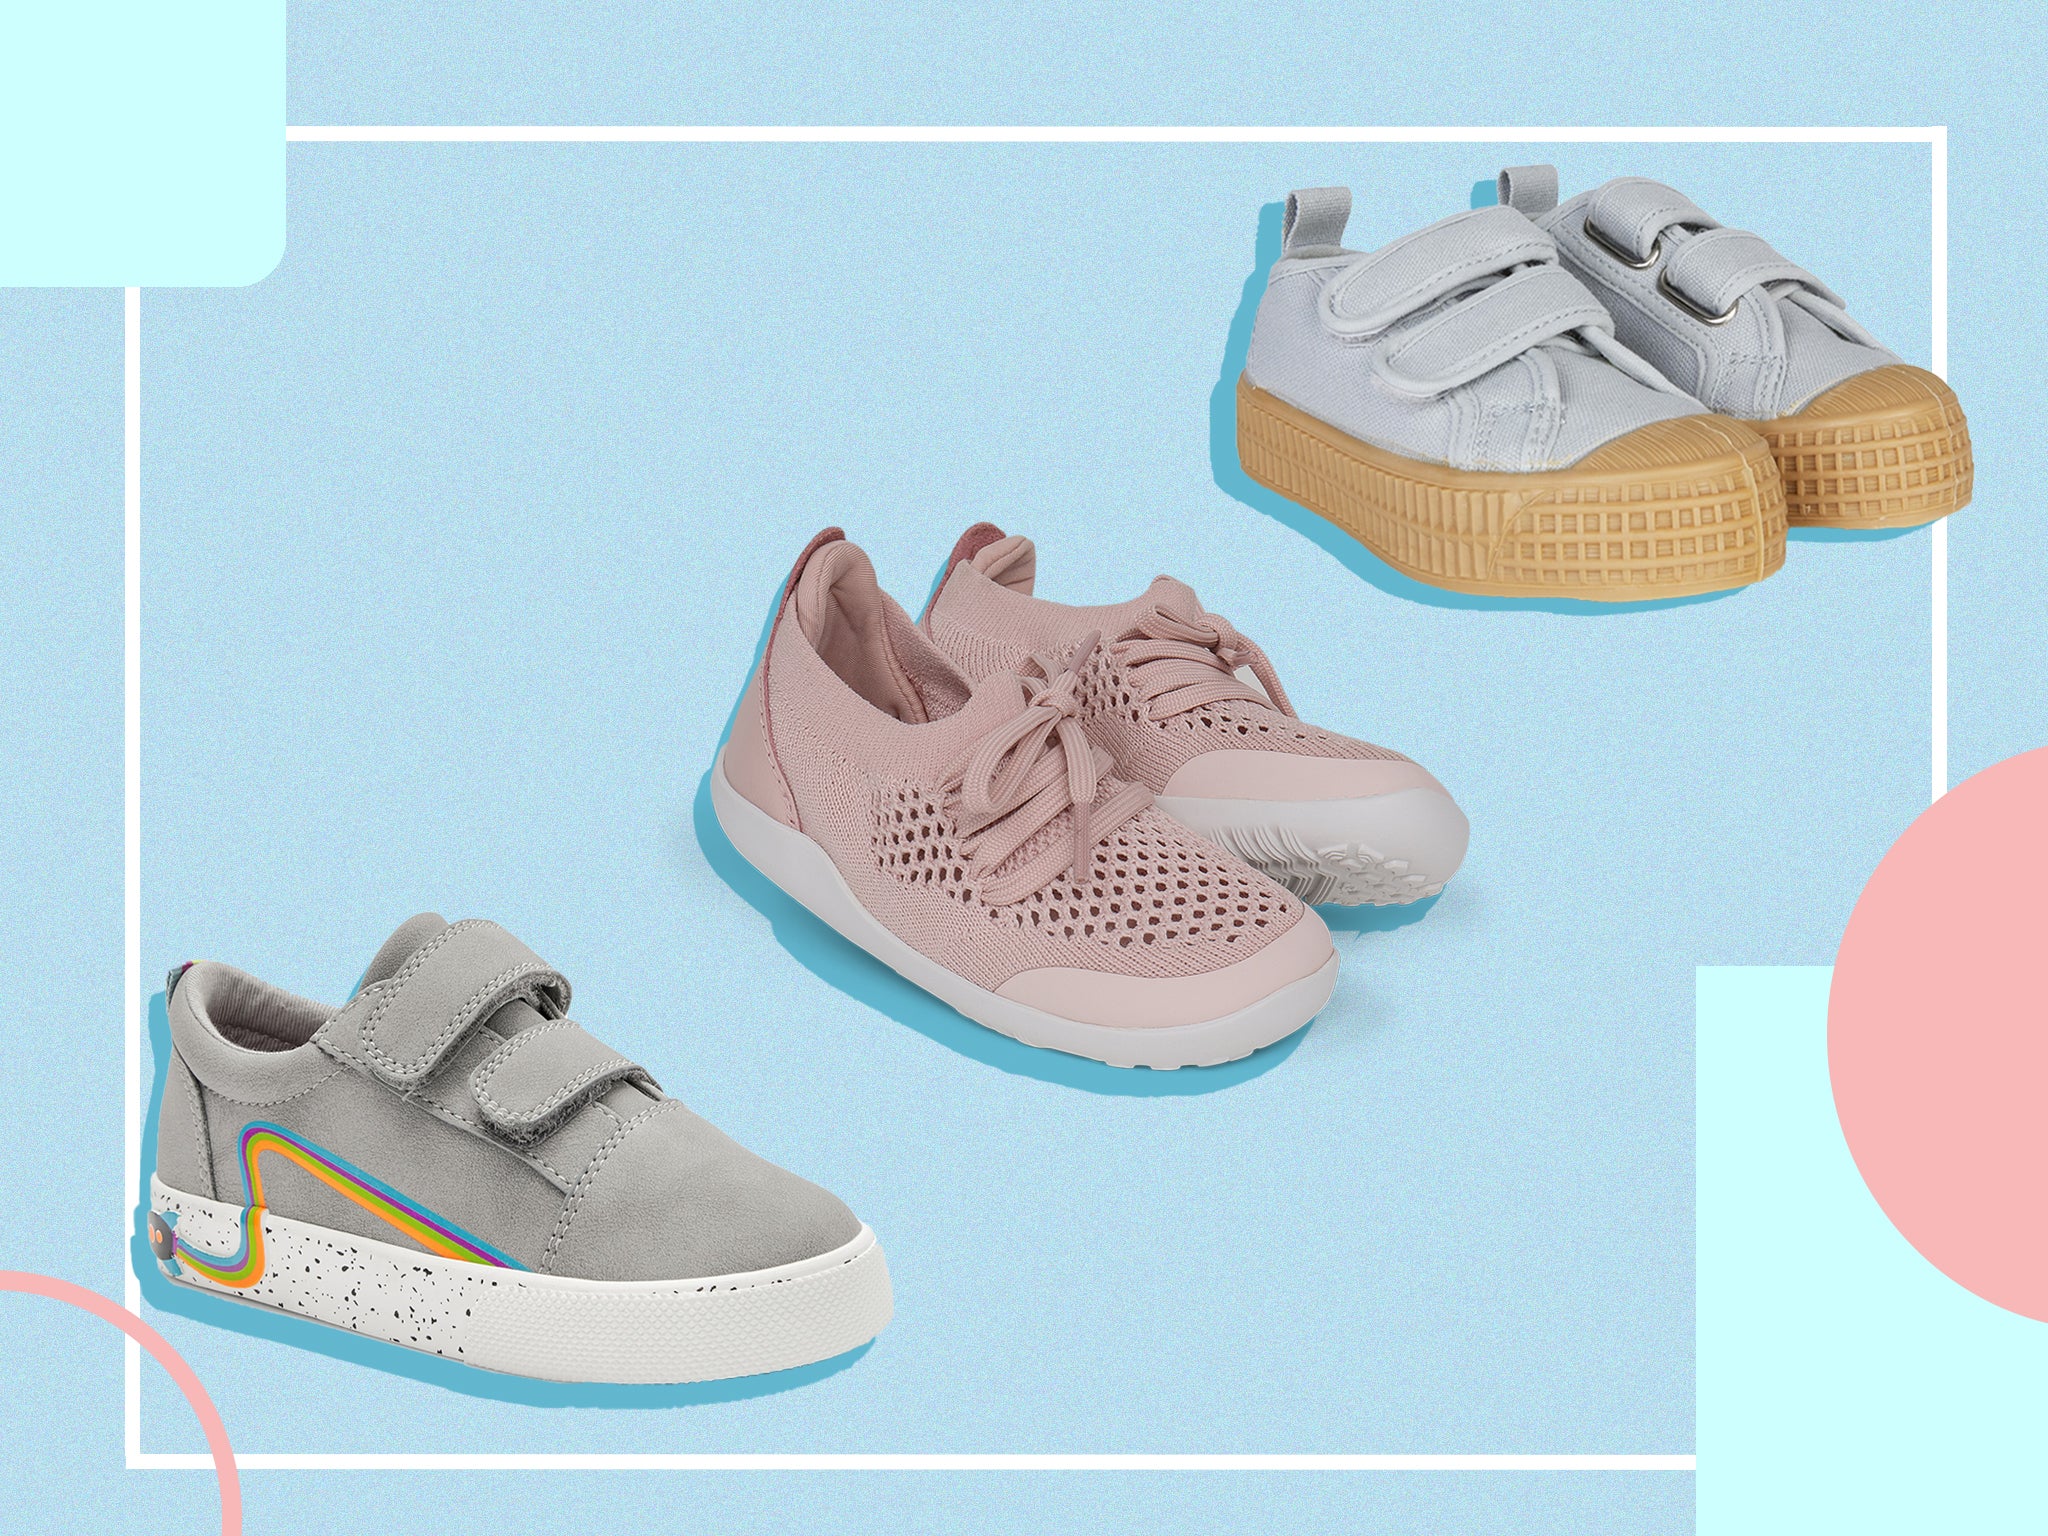 jogging shoes for kids